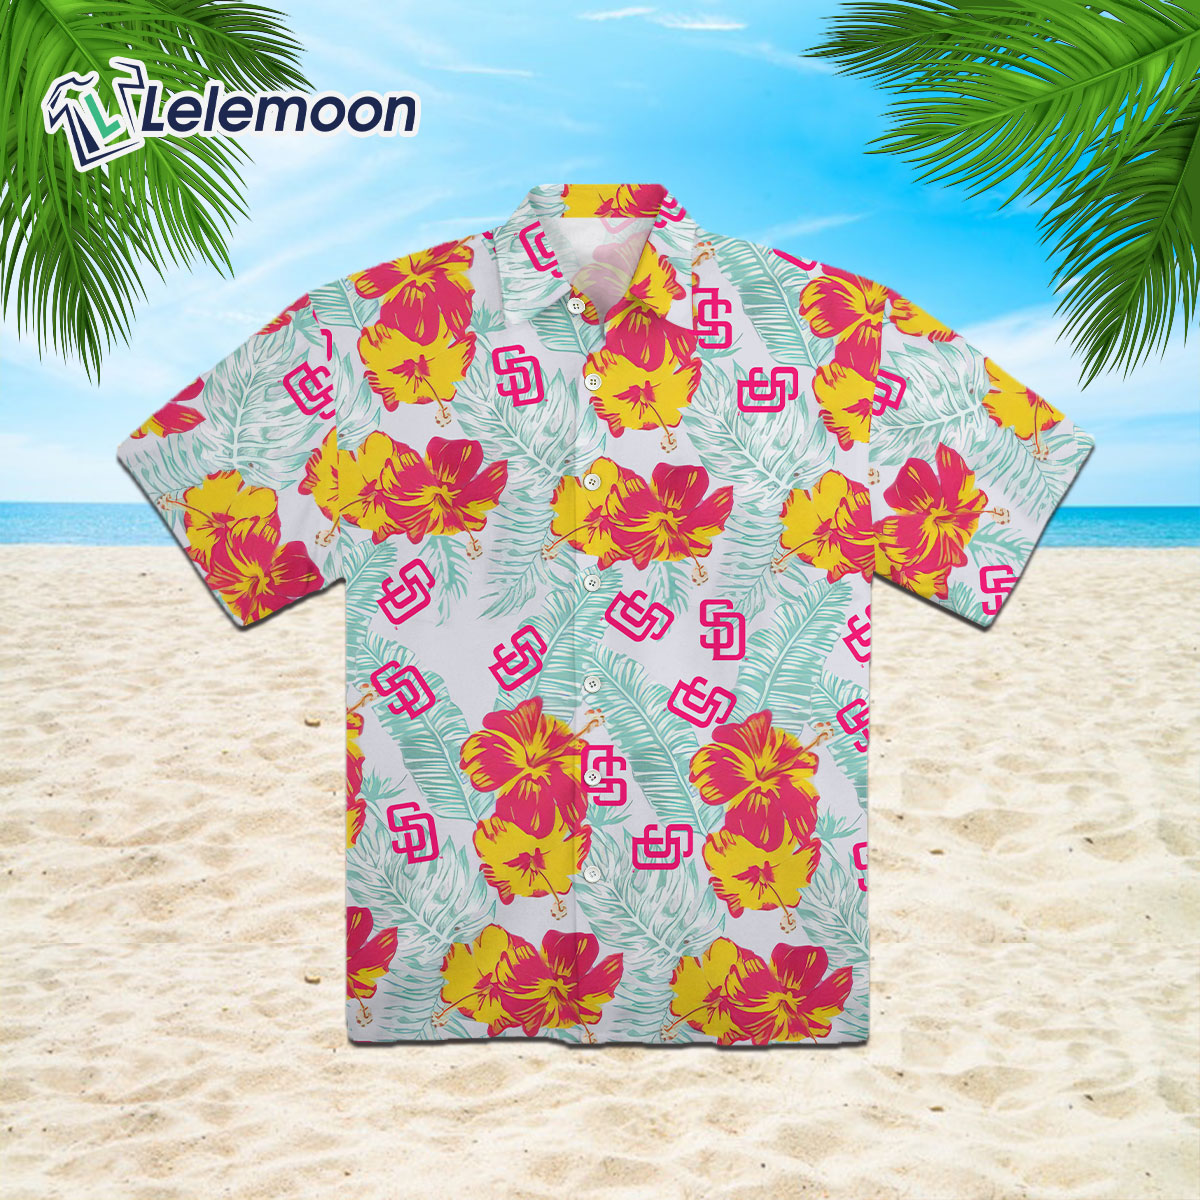 San Diego Padres Yellow Hibiscus Tropical Hawaiian Shirt For Fans -  Freedomdesign